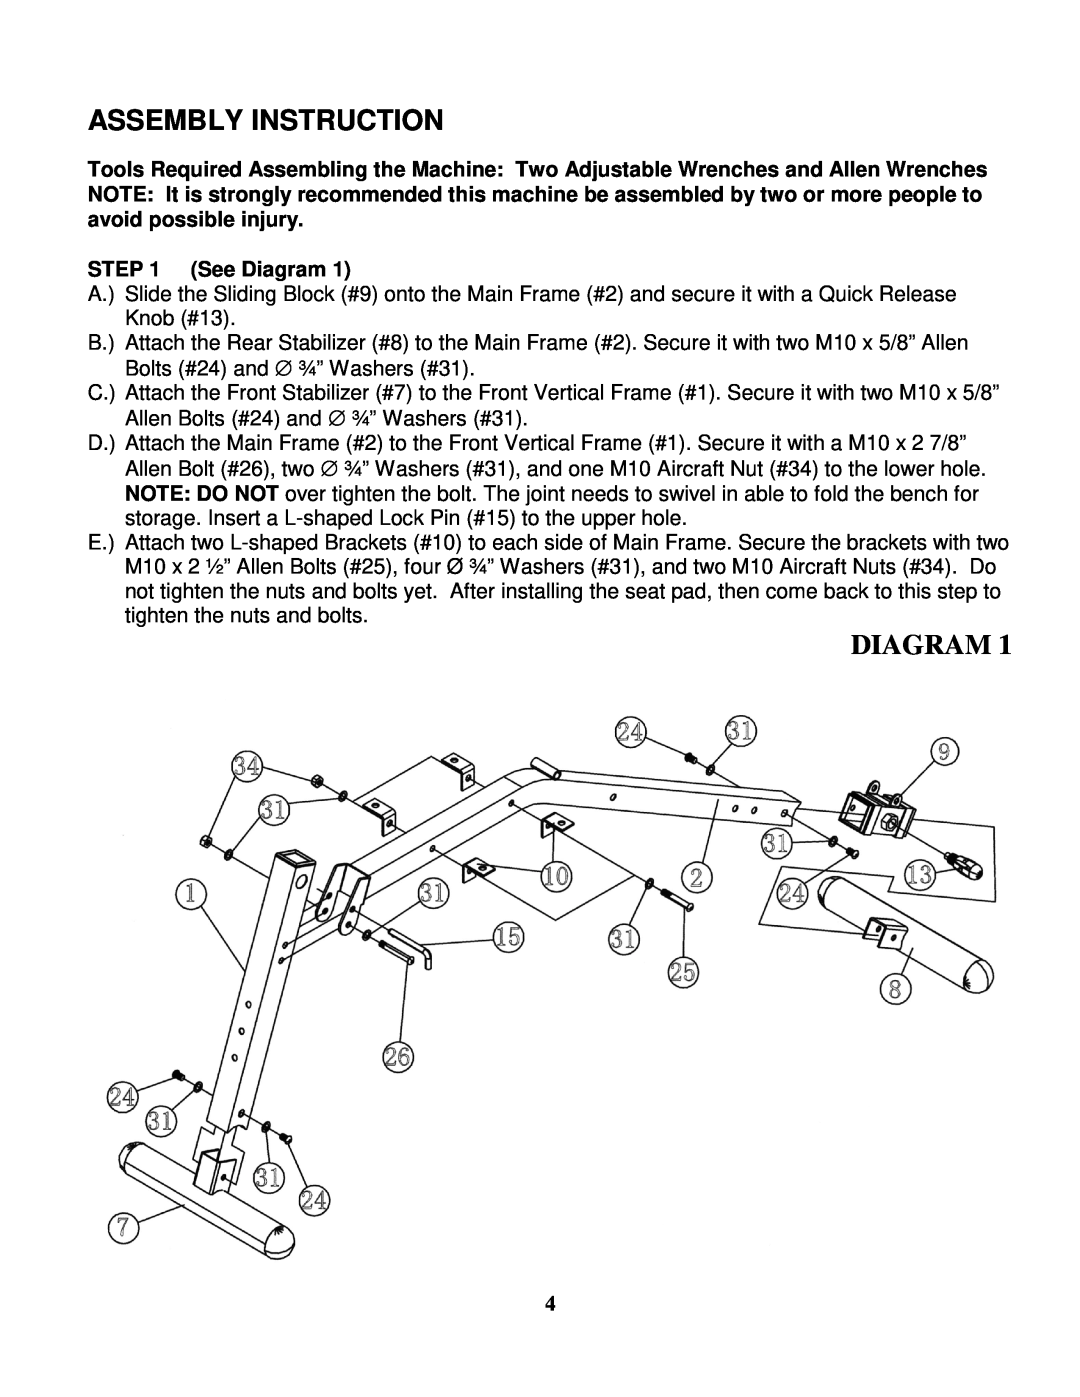 Impex SB 210 manual Assembly Instruction, Diagram 